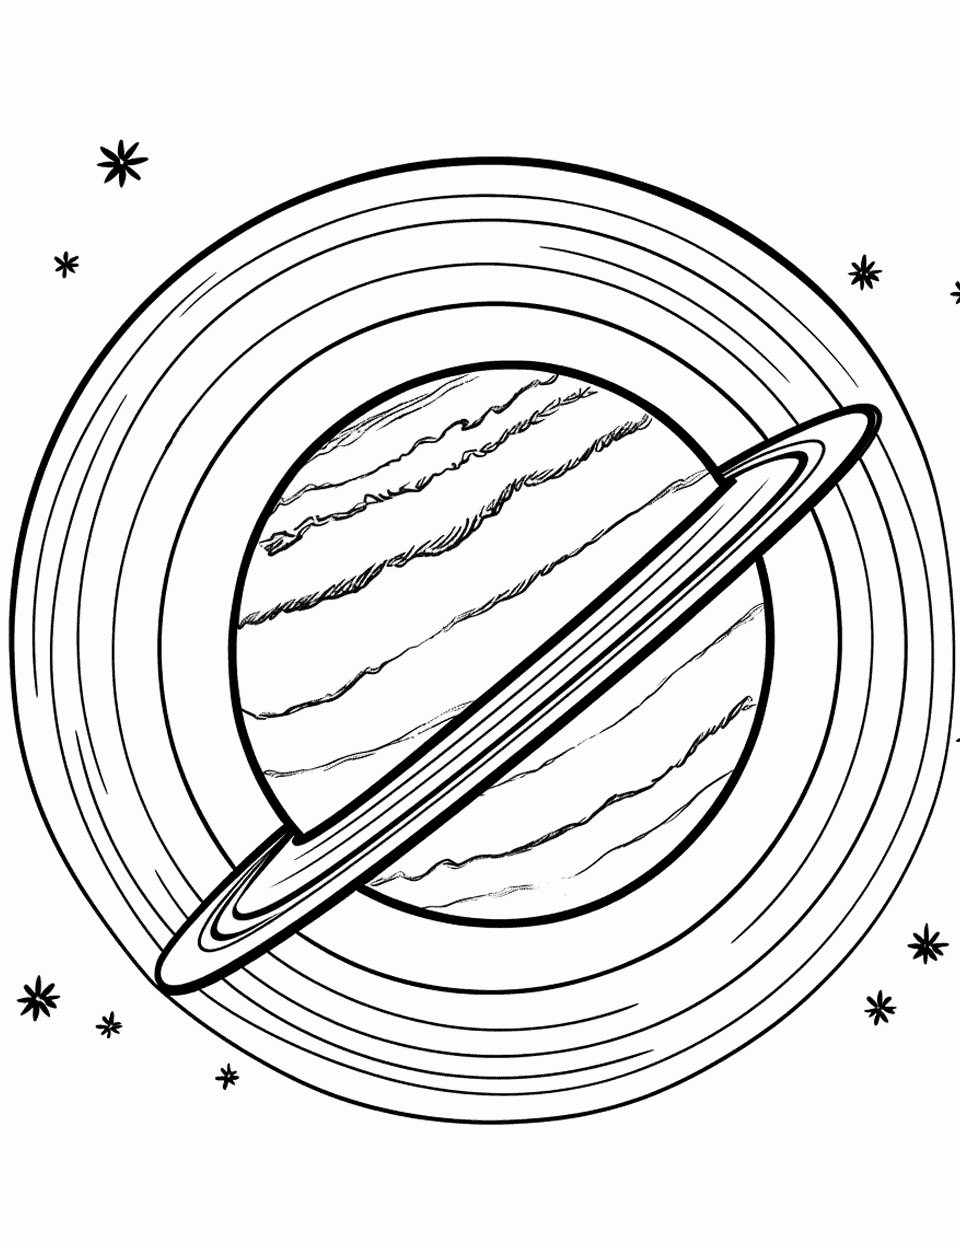 Uranus and its Rings Solar System Coloring Page - Uranus shown with its faint ring system.